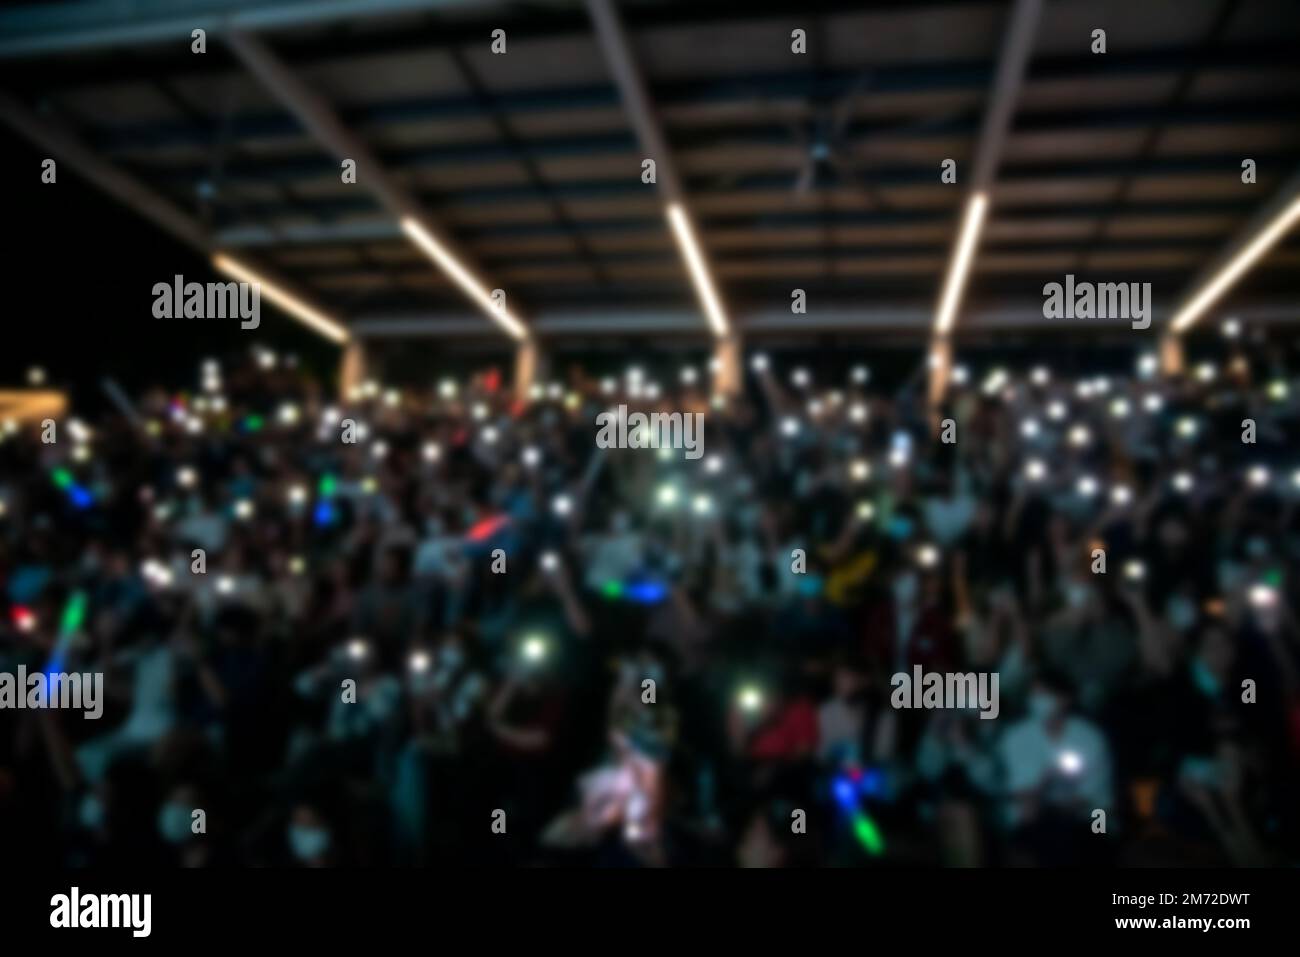 people holding cigarette lighters and mobile smartphones at a concert Stock Photo